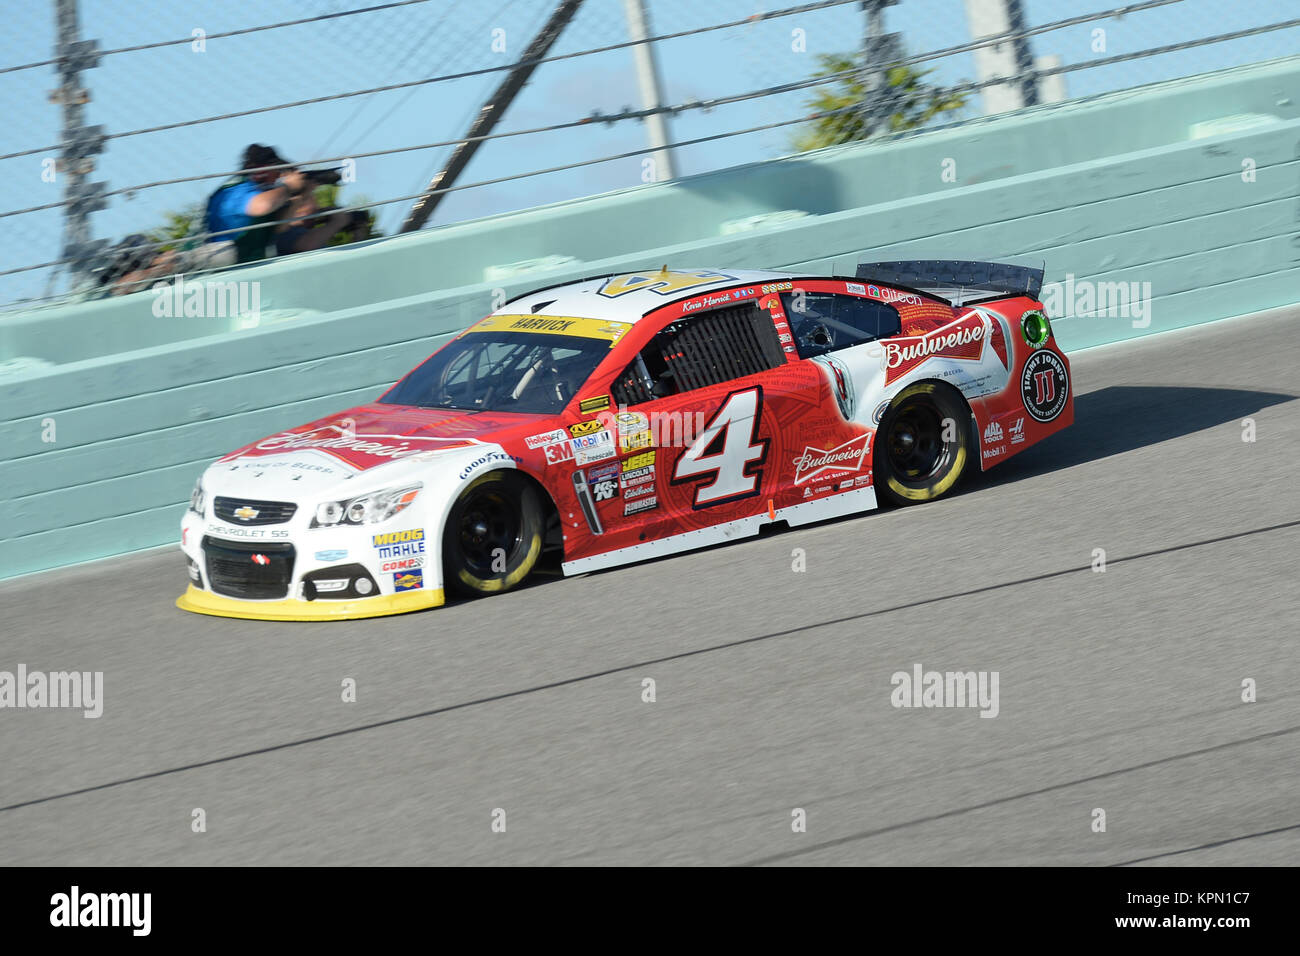 HOMESTEAD, FL - NOVEMBER 16:  Kevin Harvick during the NASCAR Sprint Cup Series Ford EcoBoost 400 at Homestead-Miami Speedway on November 16, 2014 in Homestead, Florida.  People:  Kevin Harvick Stock Photo